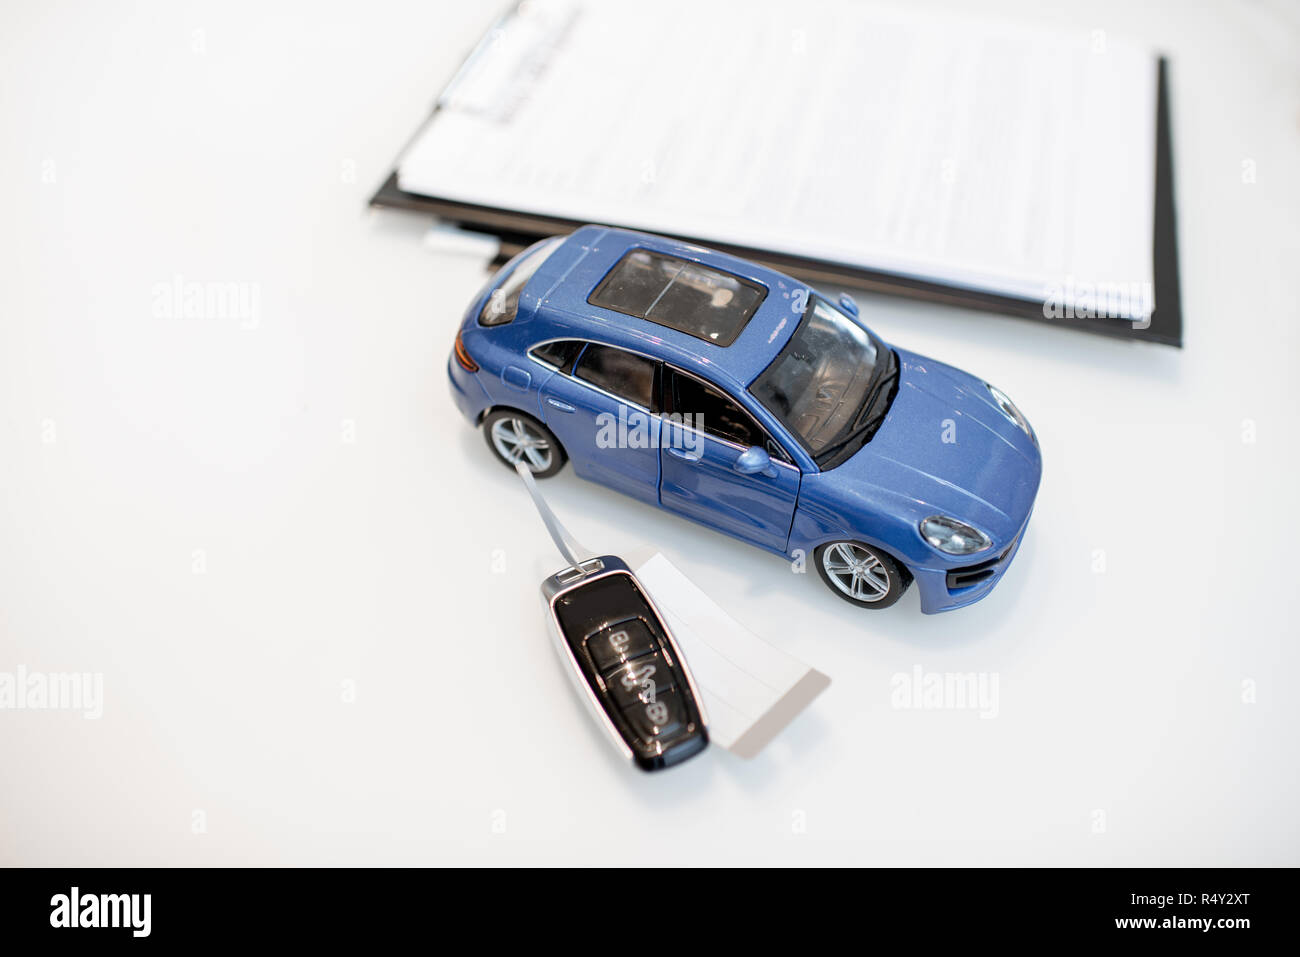 Close-up of a toy car with keychain and documents on the white table Stock Photo